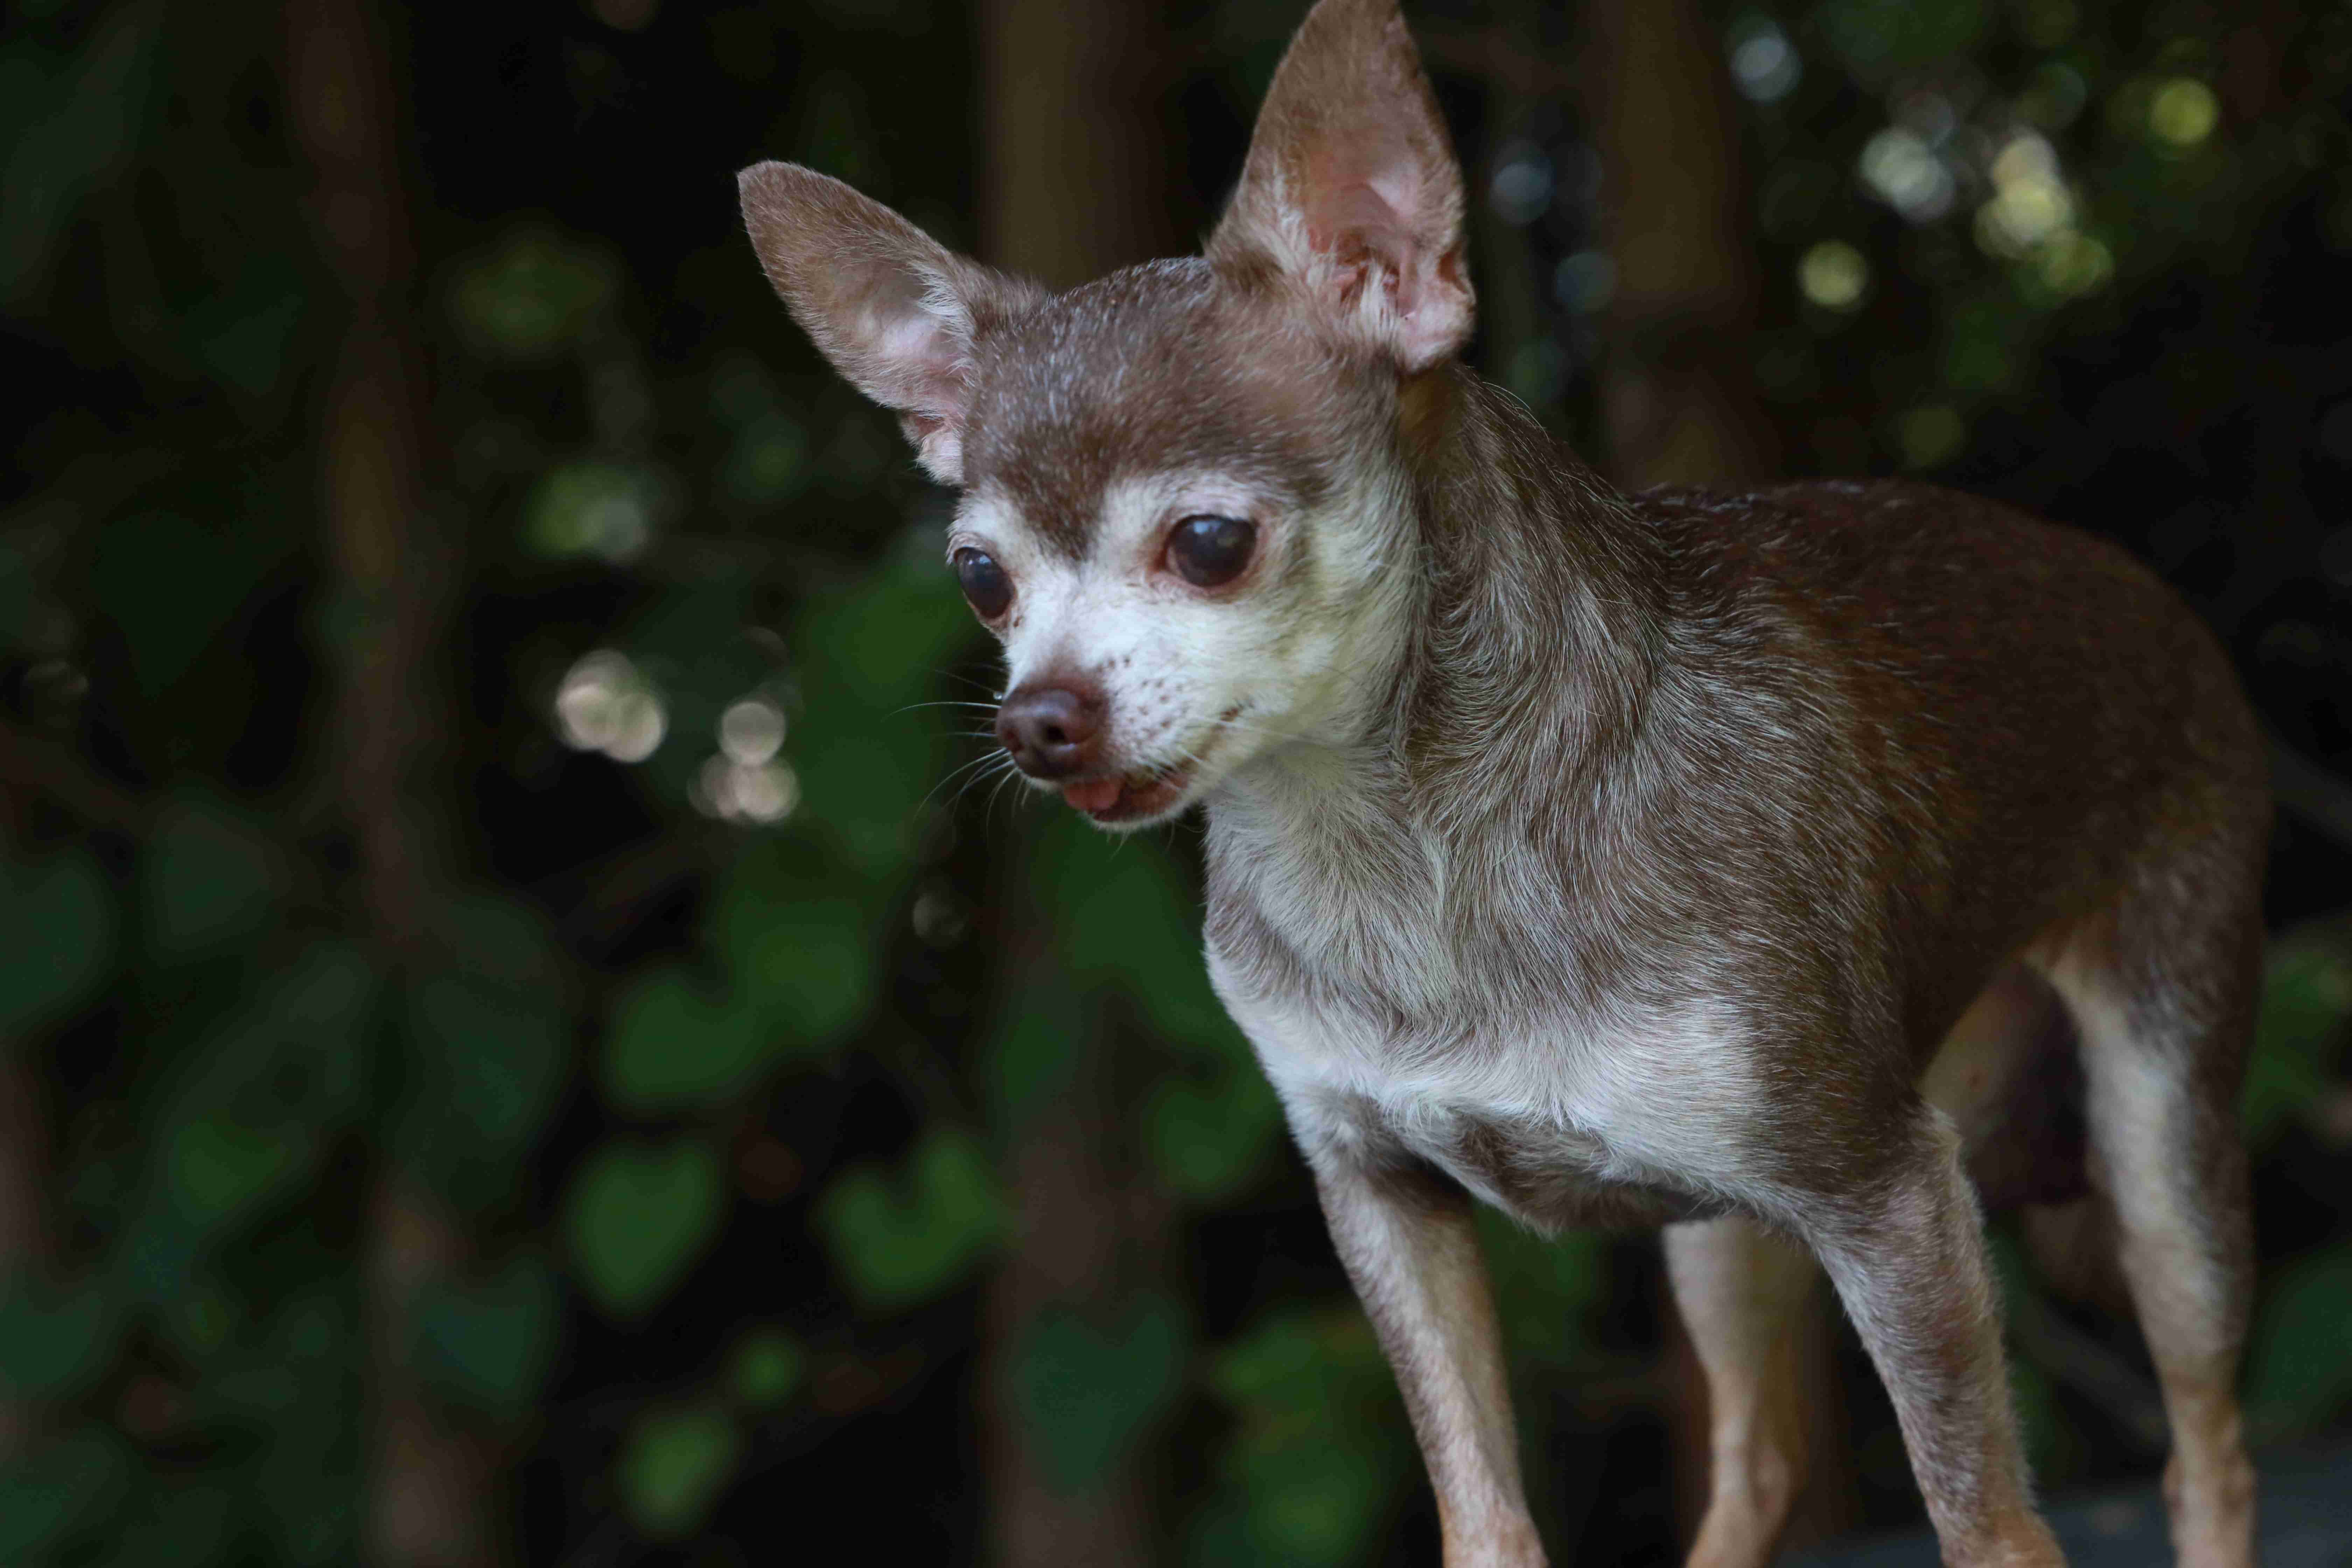 Can anger issues in Chihuahuas be worsened by certain types of food or diet?